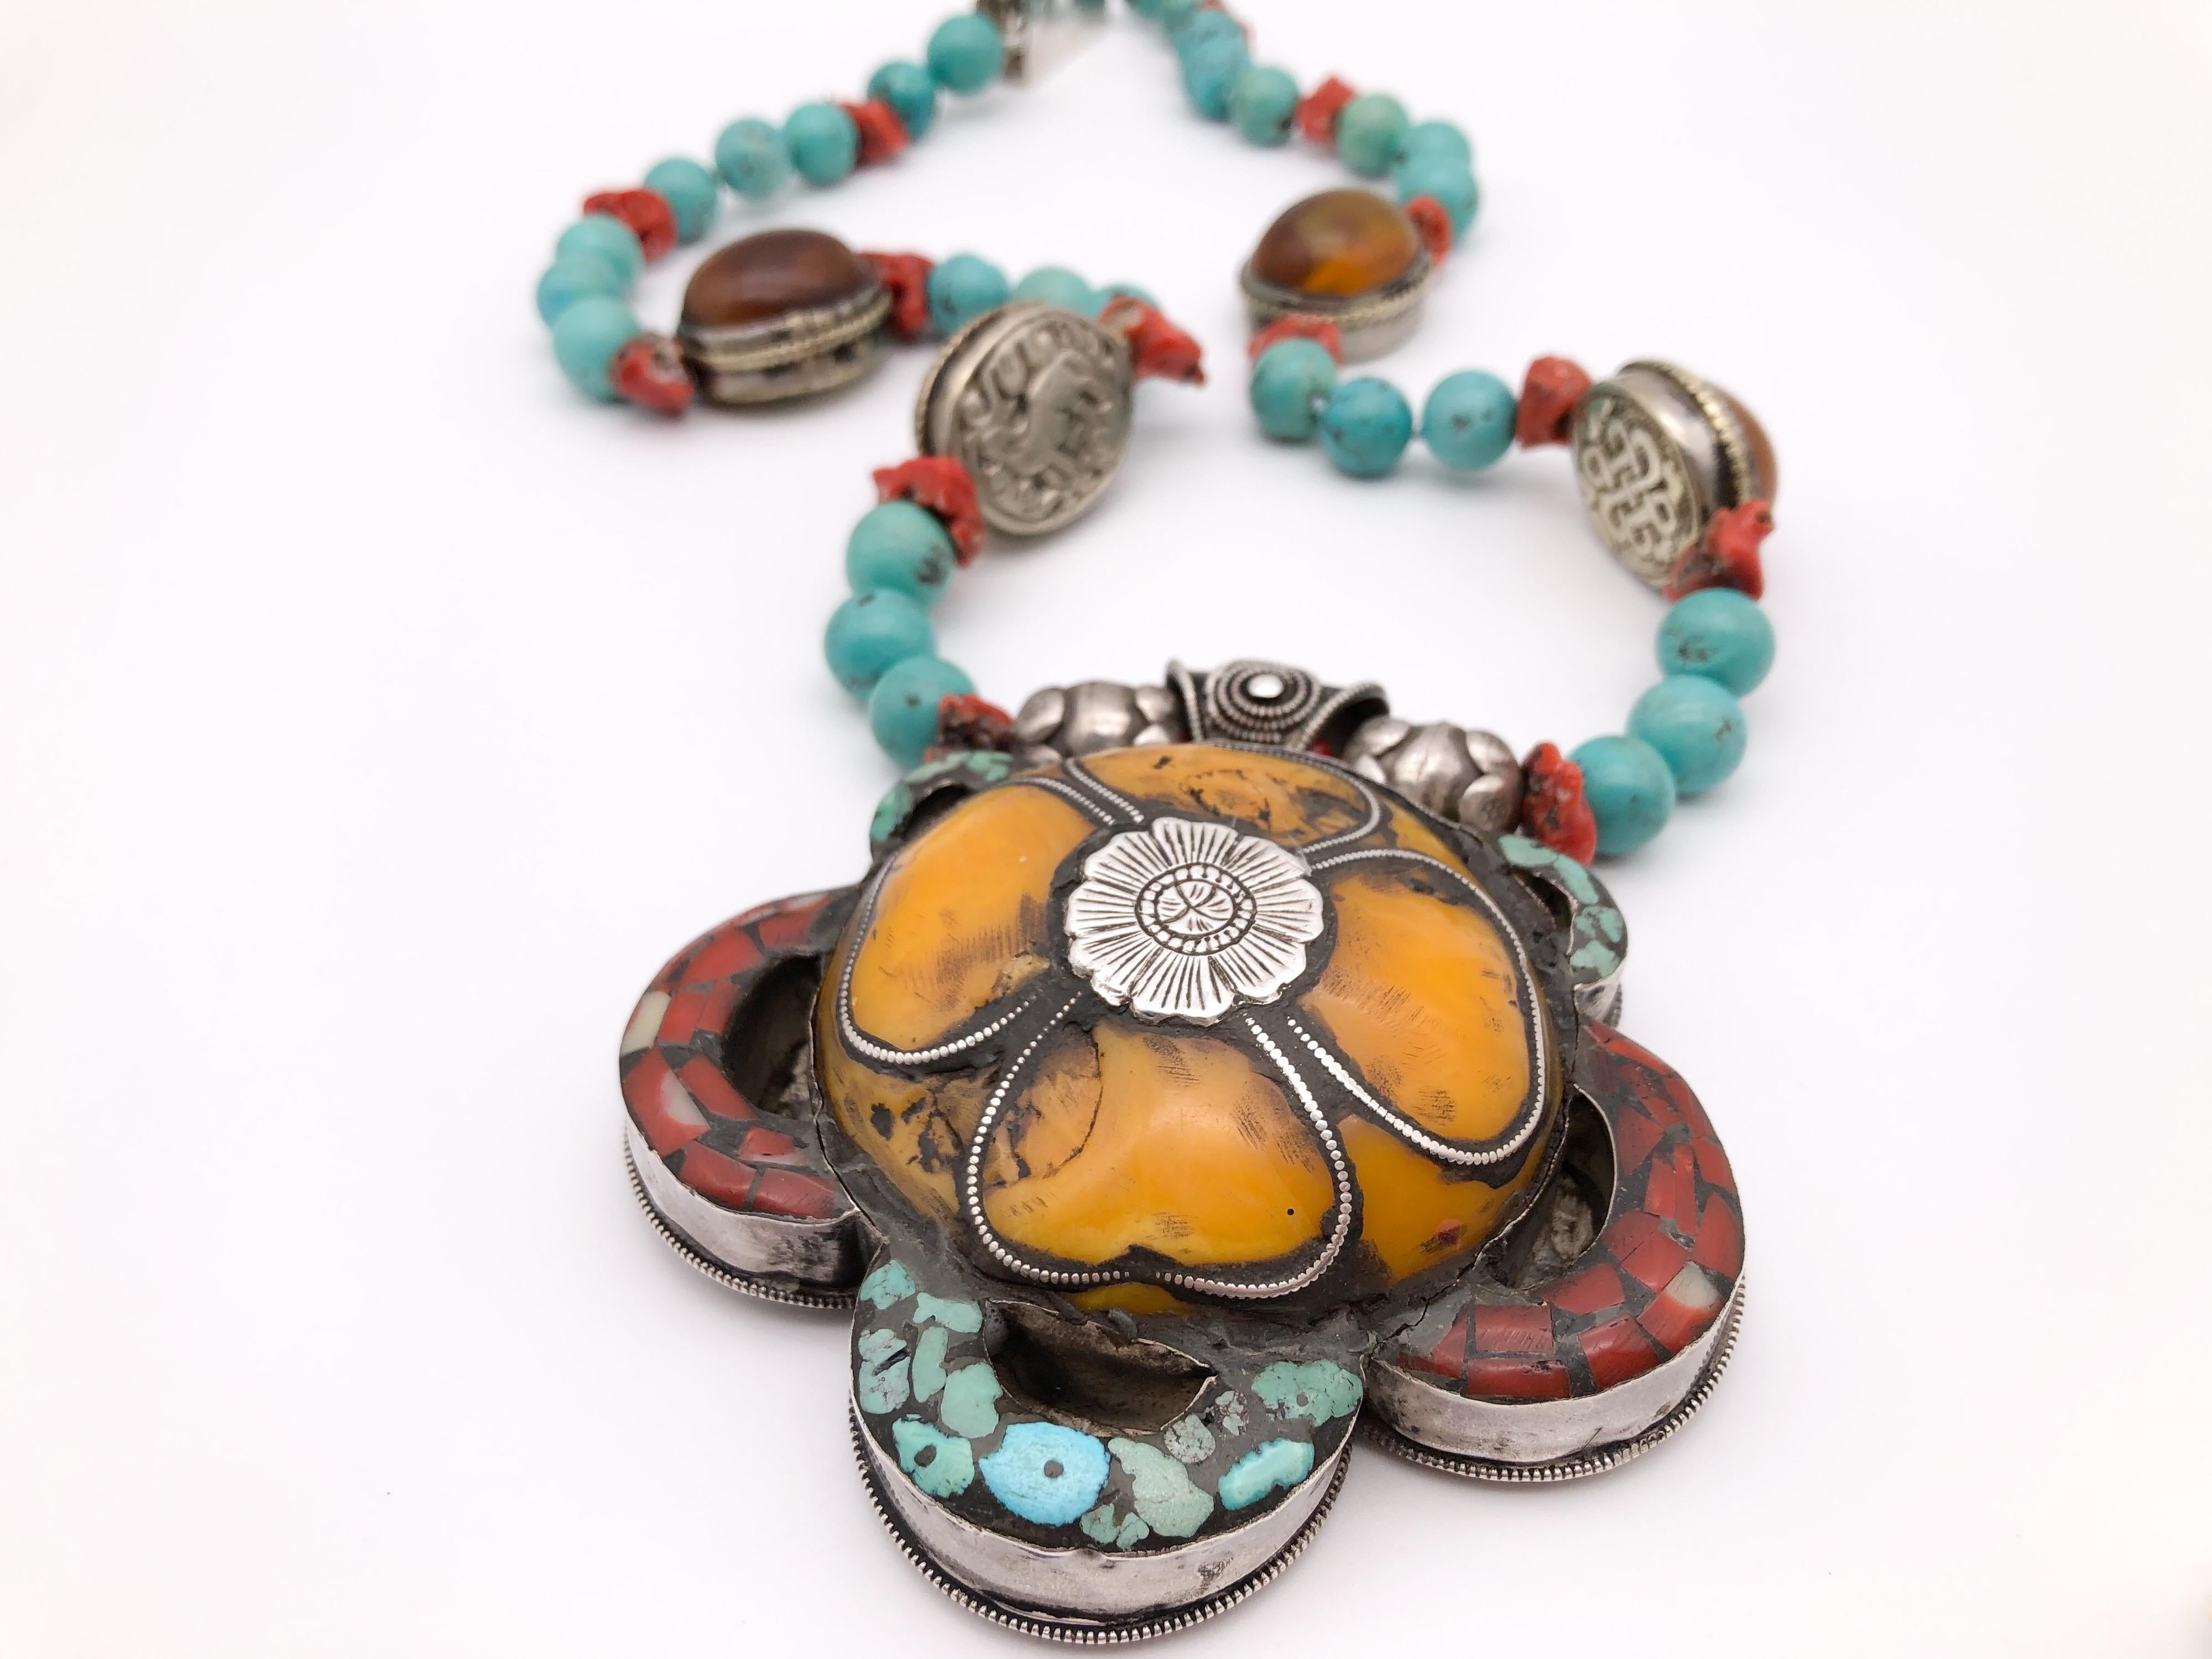 Women's A.jeschel Statement and Unique Lotus Flower Tibetan Pendant Amber and Turquoise. For Sale